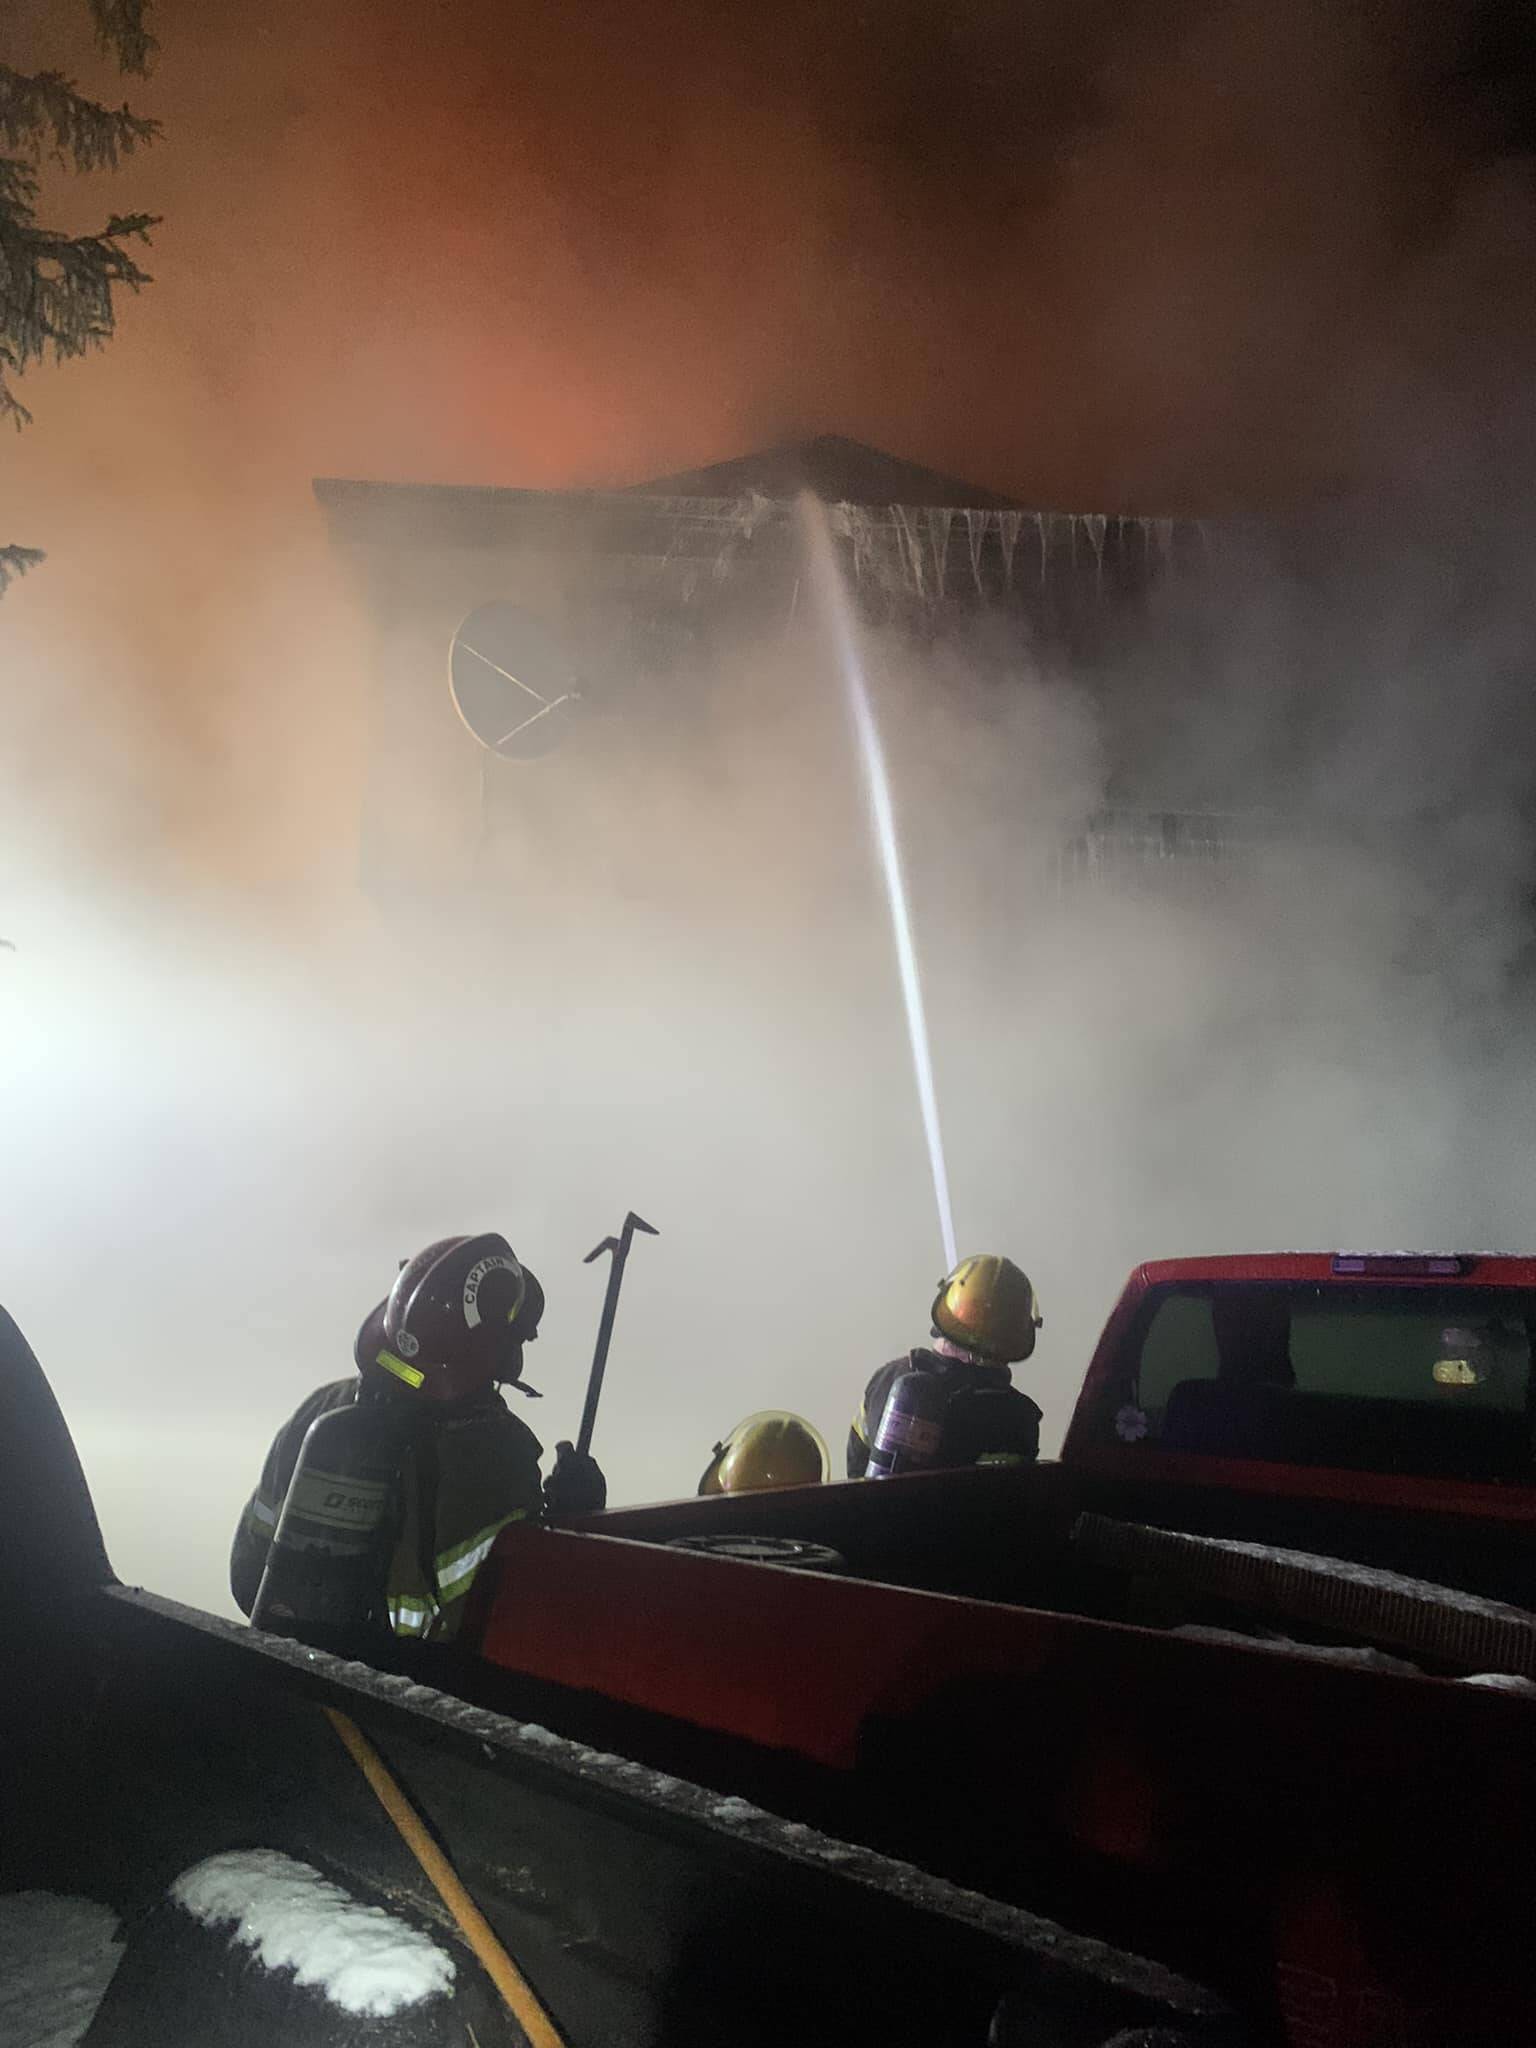 CCFR were called to a residential structure fire on Saturday evening in the 2500 block of Pederson Street. Crews were successful in extinguishing the fire and everyone inside was safely evacuated. (Courtesy Photo / CCFR)